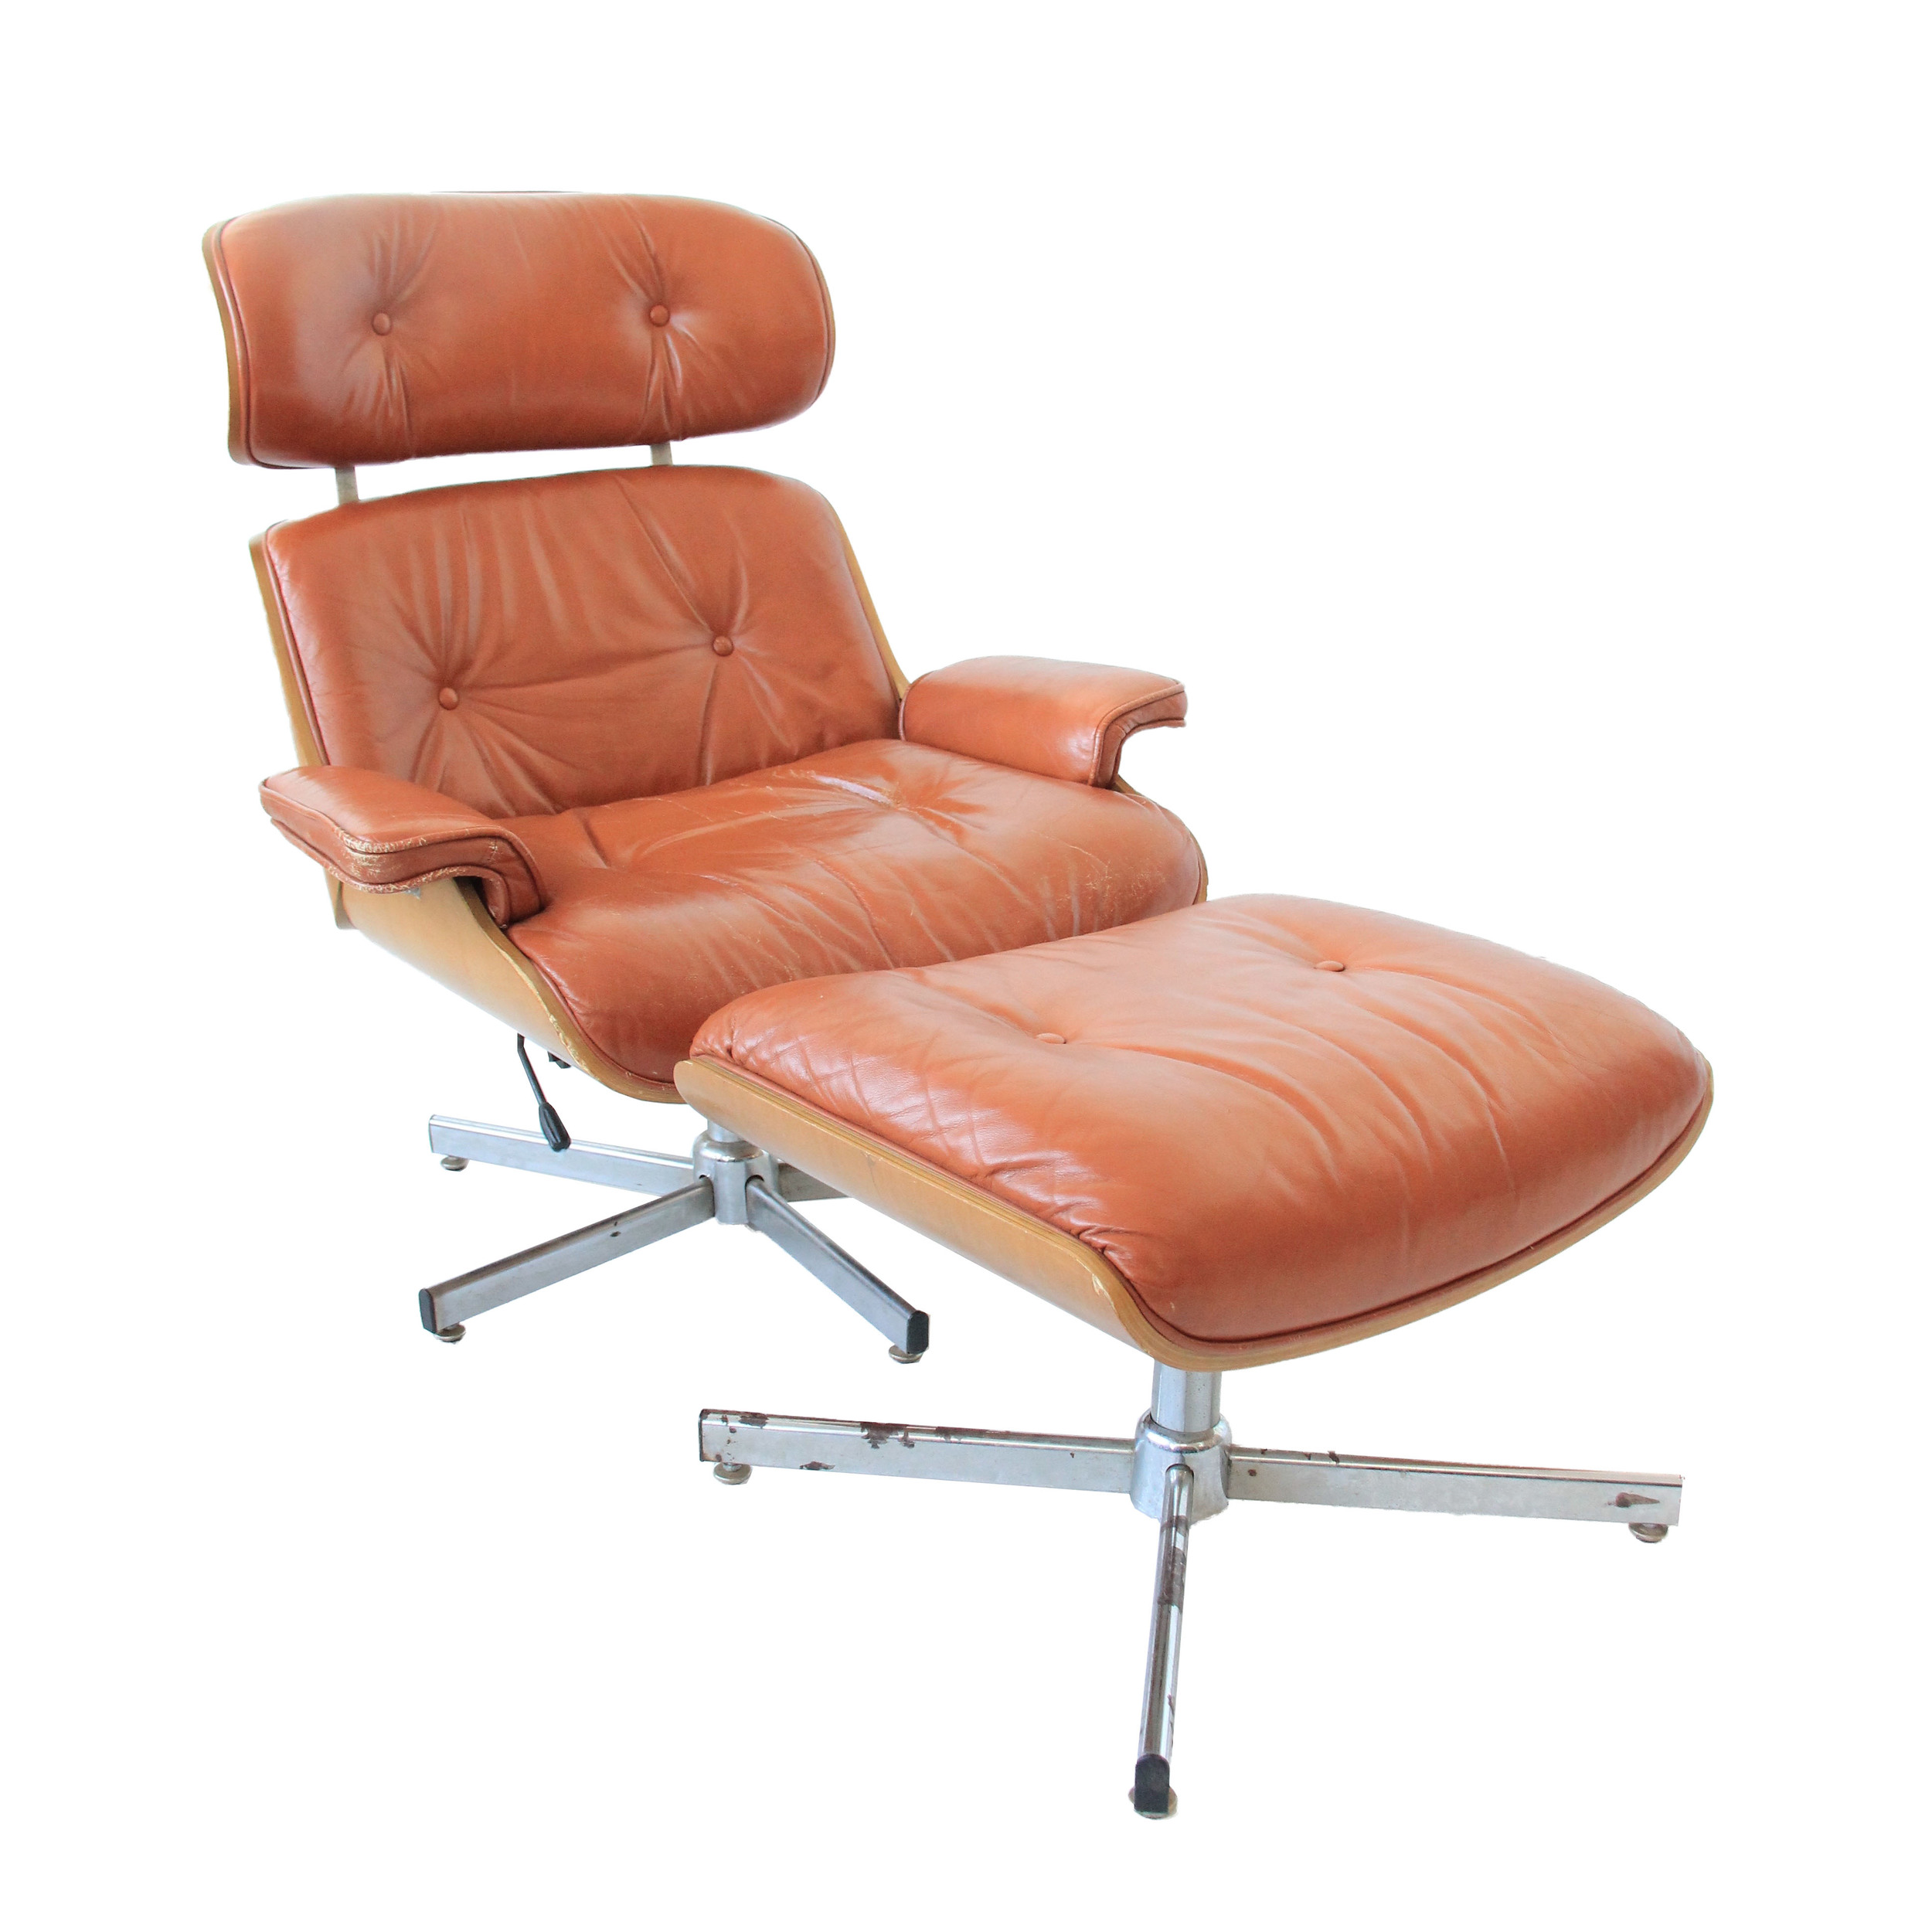 Vintage Mid Century Modern Eames Lounge Chair and Ottoman